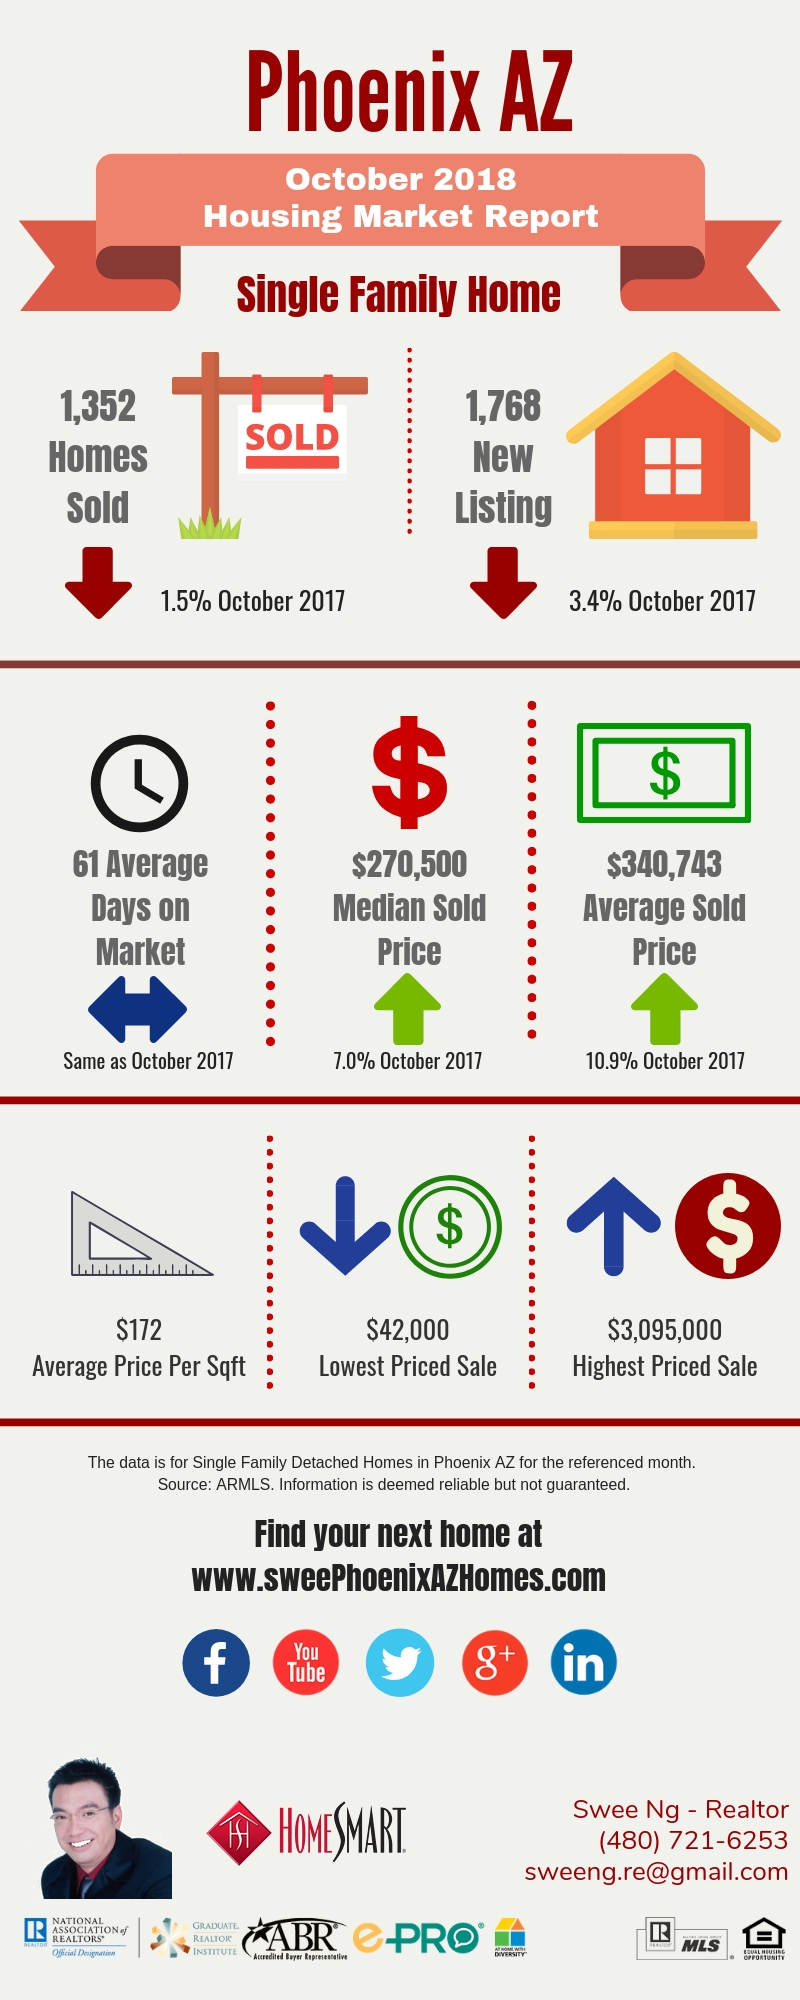 Phoenix AZ Housing Market Trends Report October 2018 by Swee Ng